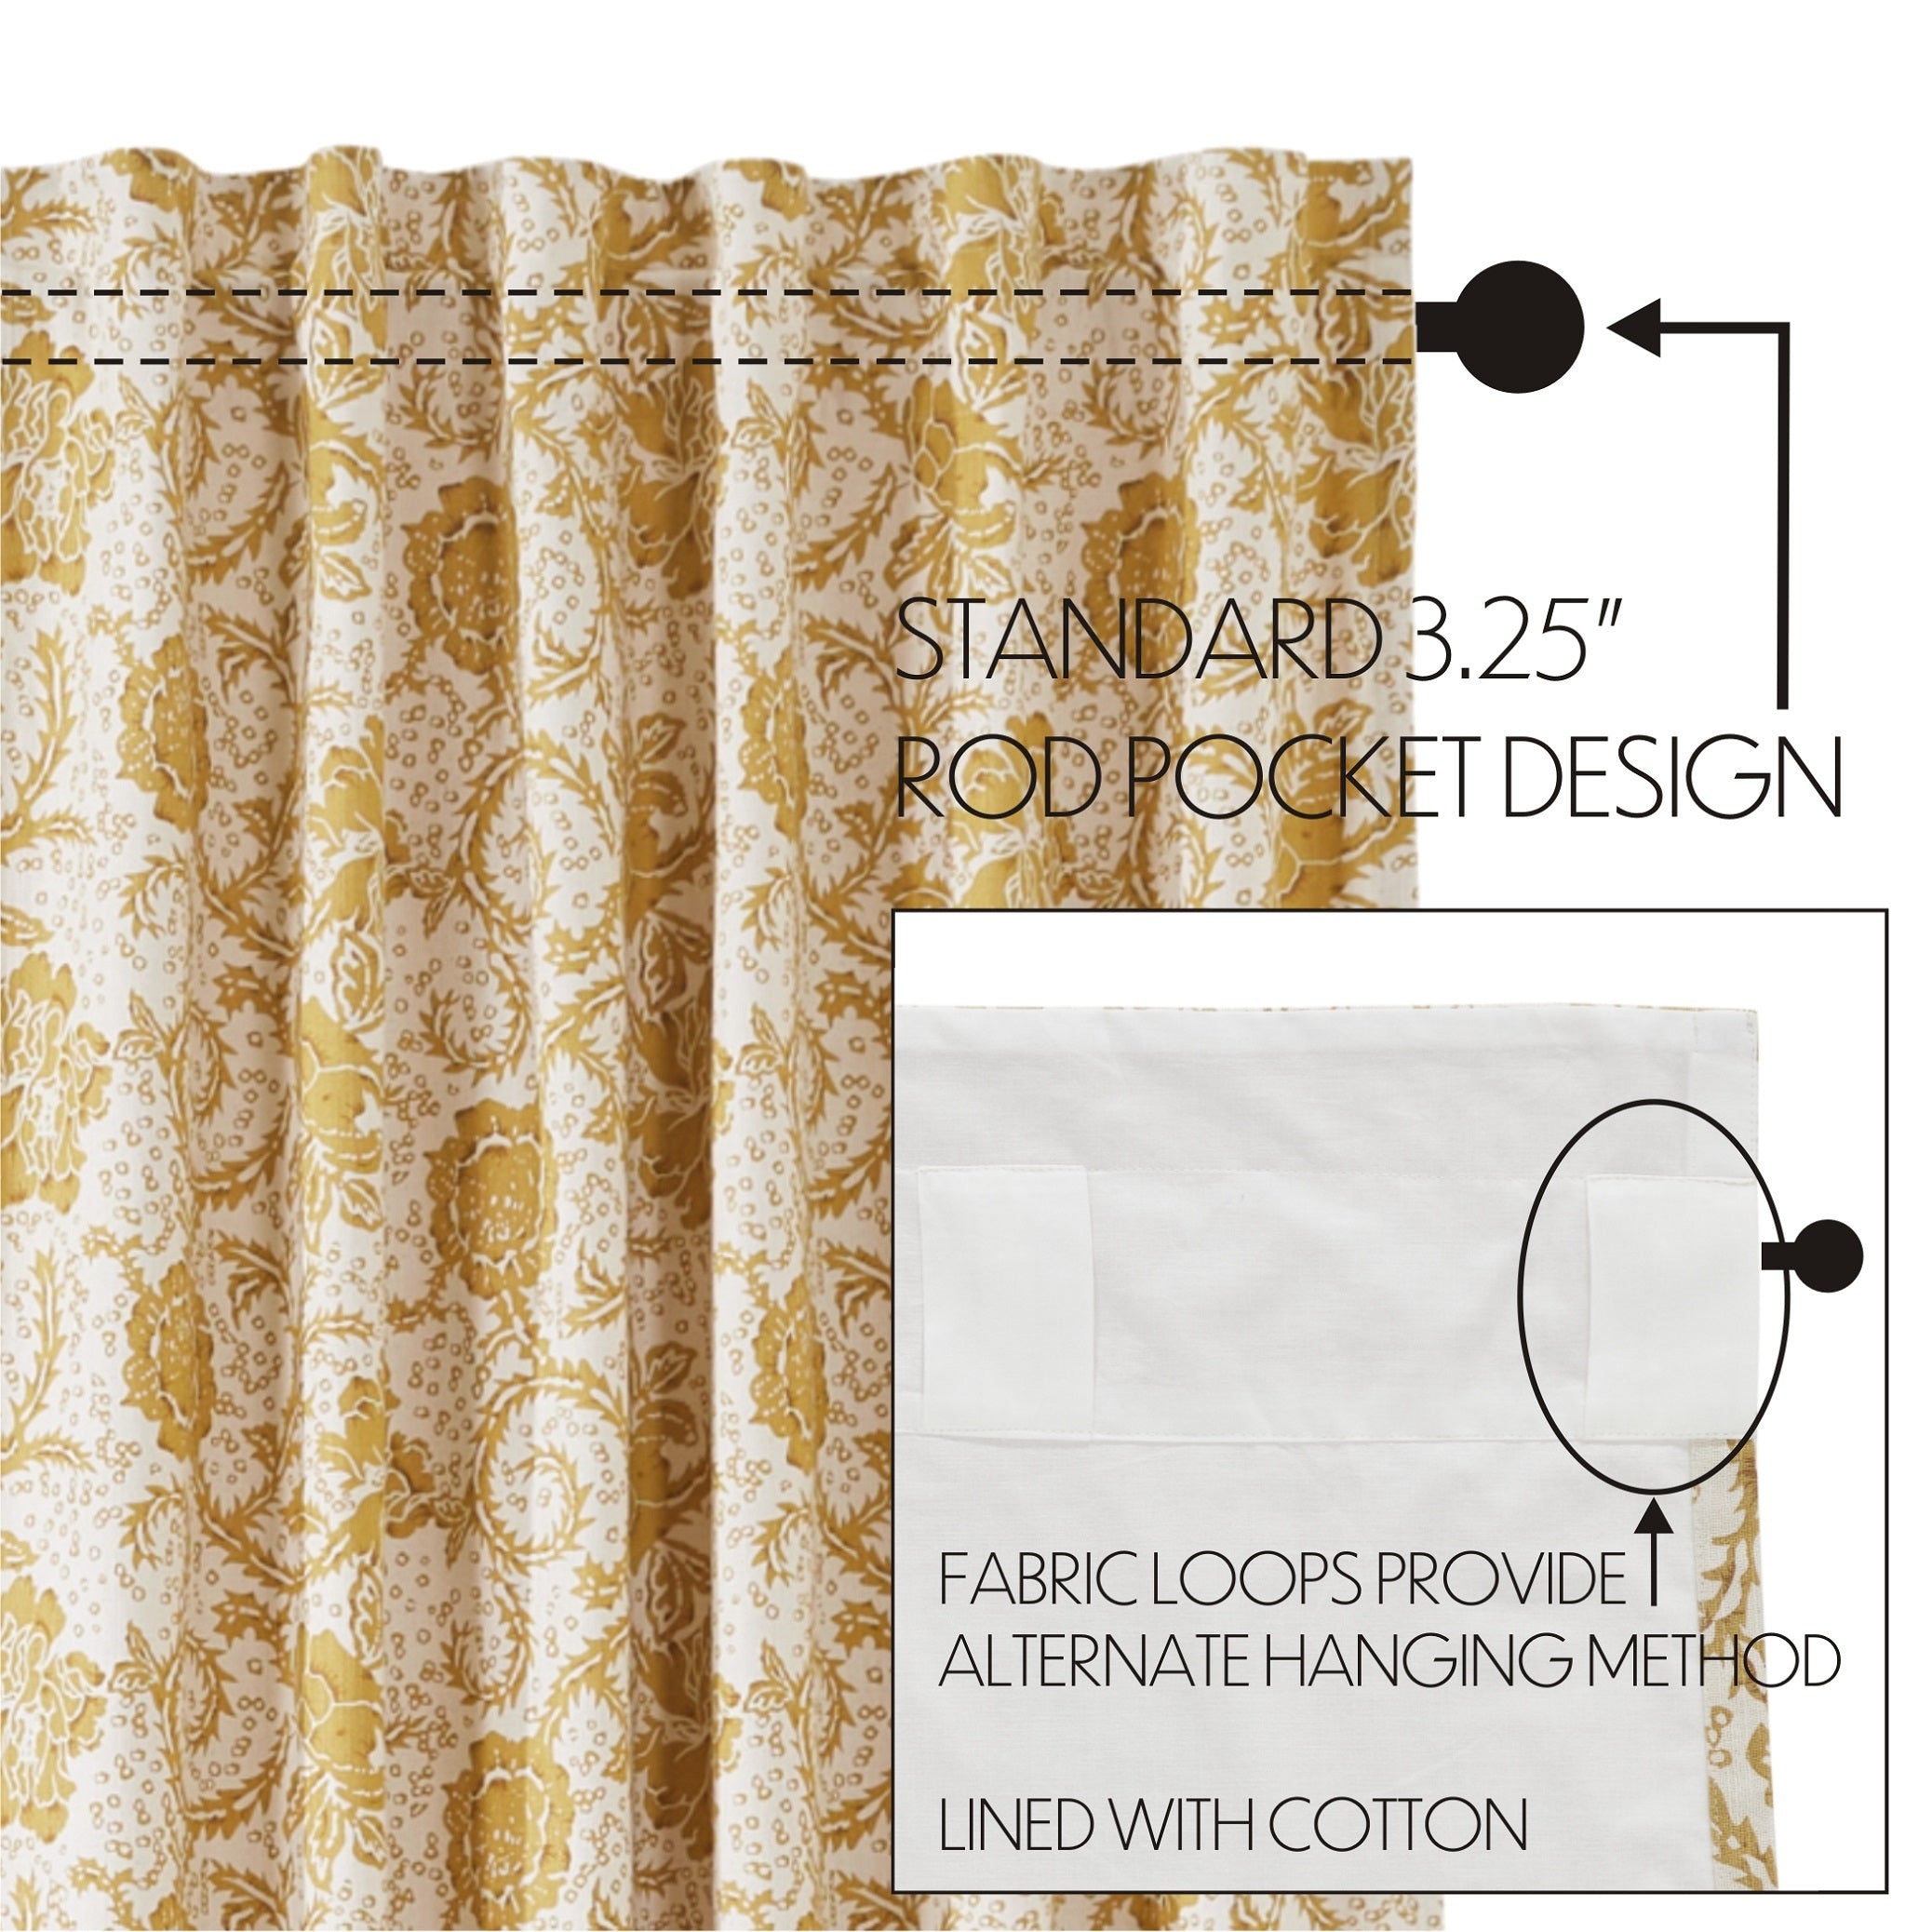 Dorset Gold Floral Swag Curtain Set of 2 36x36x16 VHC Brands